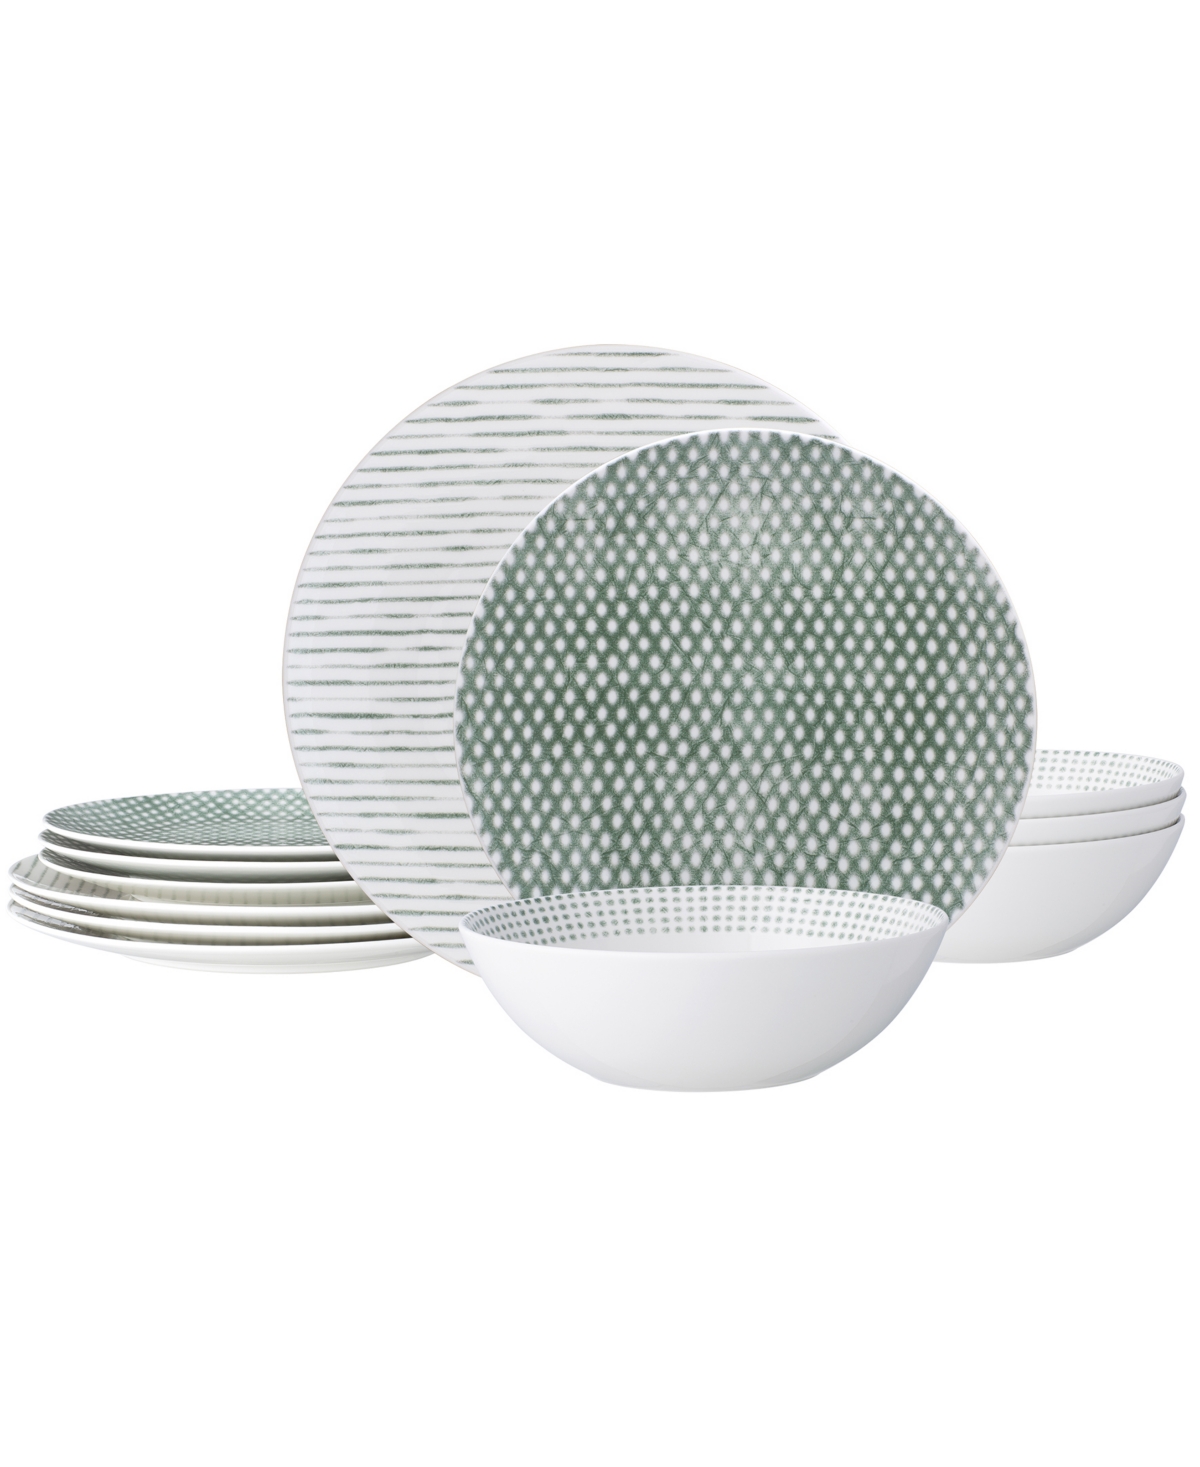 Hammock Coupe 12-Pc. Dinnerware Set, Service for 4 - Green